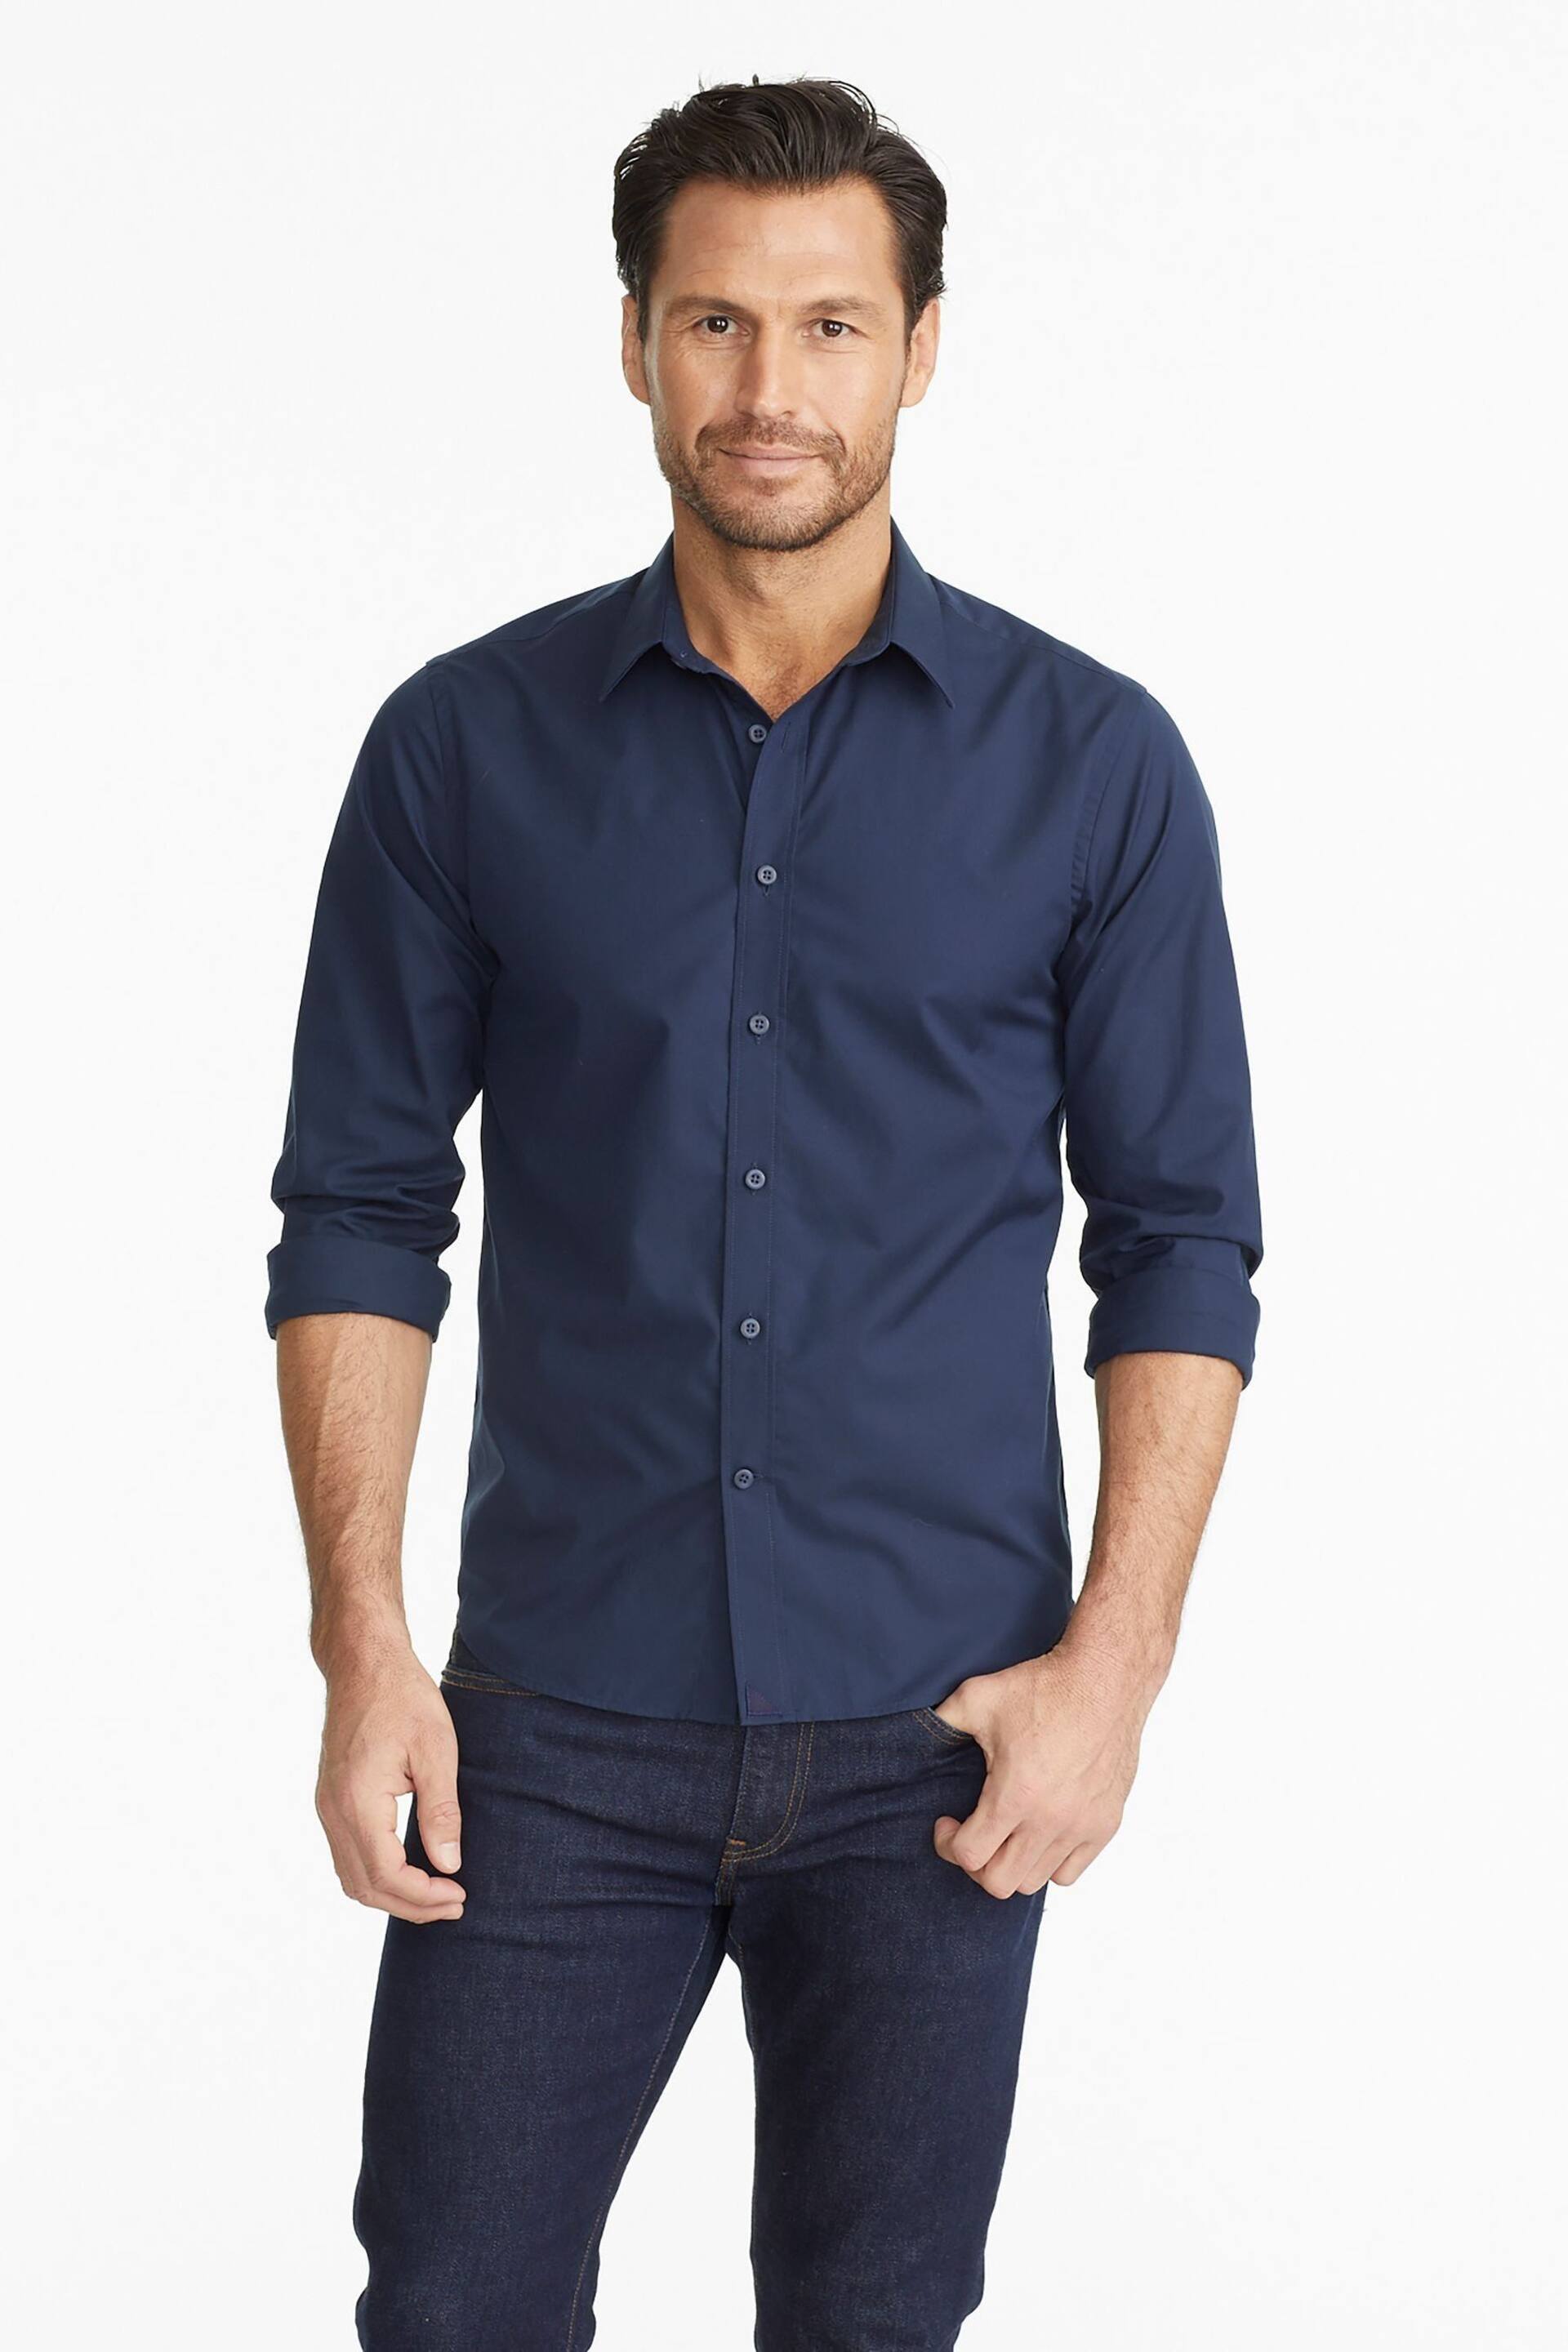 UNTUCKit Navy Blue Wrinkle-Free Relaxed Fit Castello Shirt - Image 1 of 6